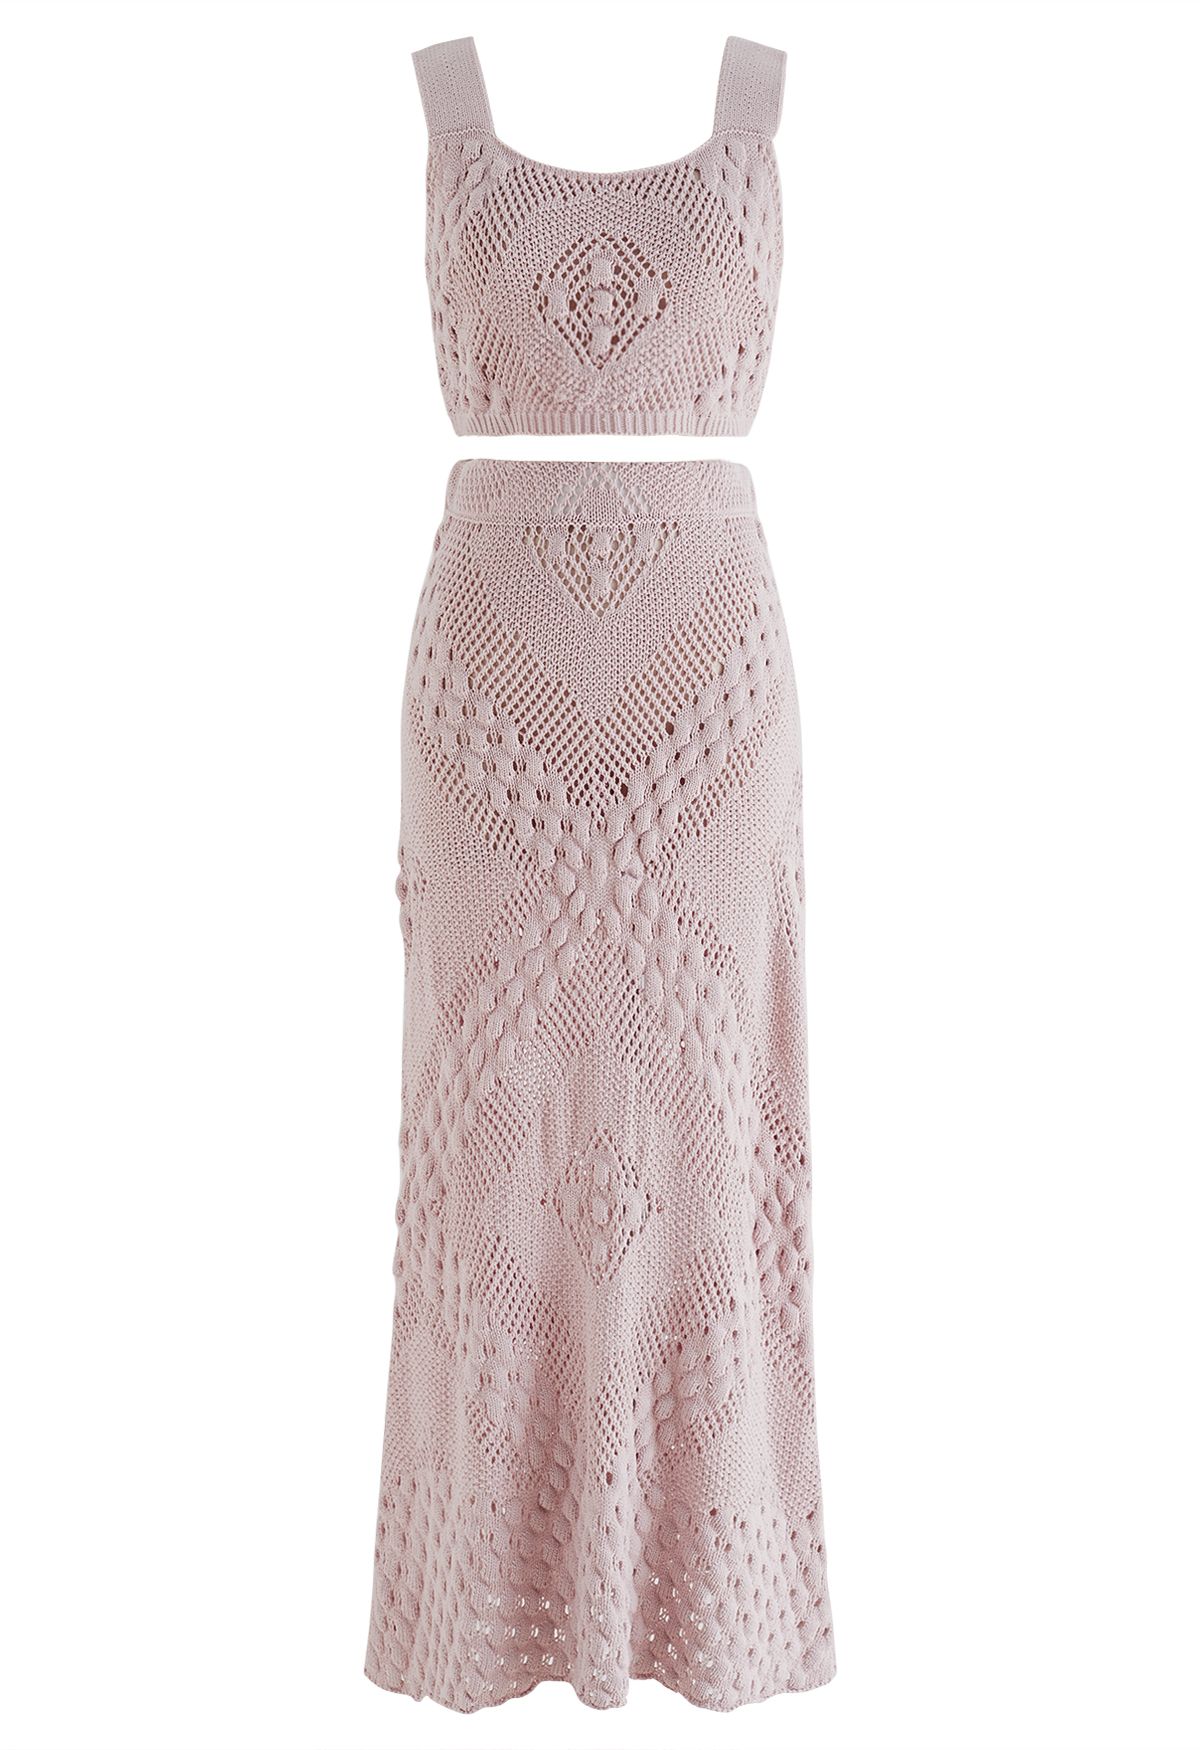 Embossed Pointelle Knit Tank Top and Skirt Set in Dusty Pink